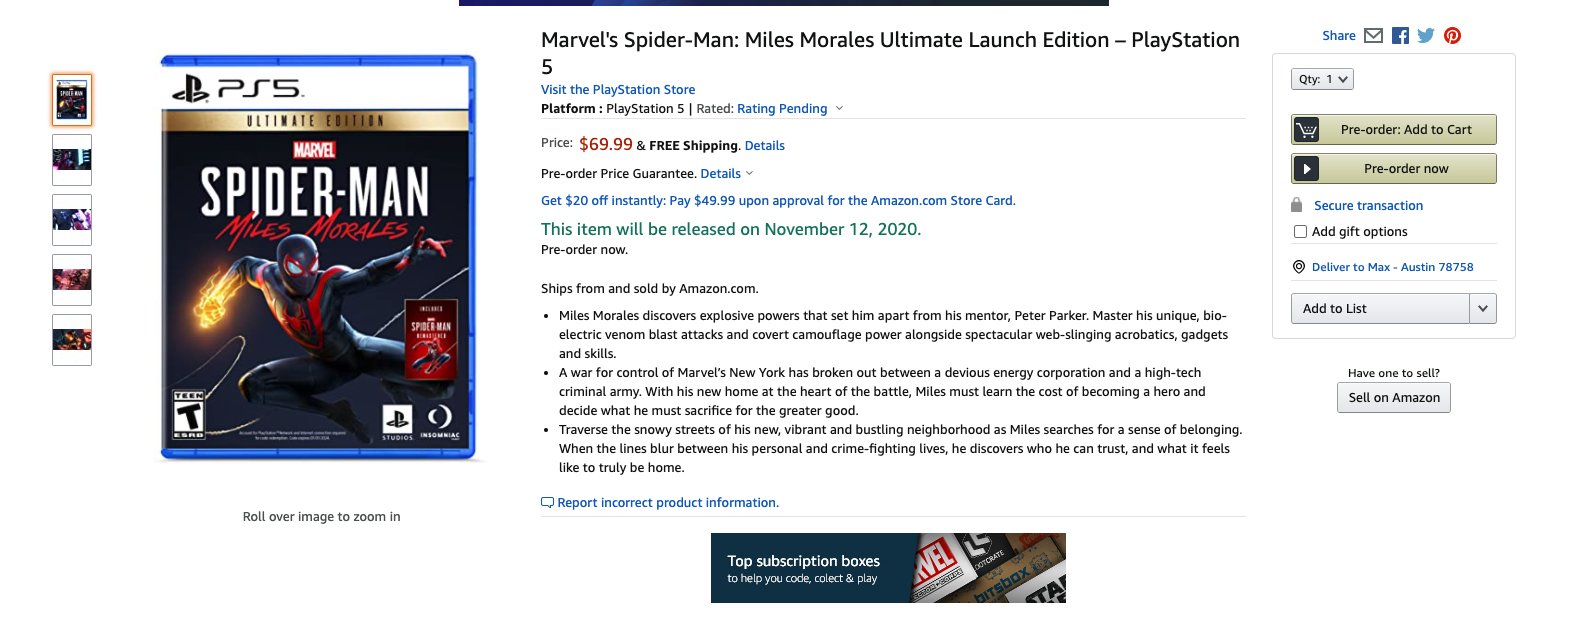 Marvel's Spider-Man Miles Morales - Ultimate Edition - PlayStation 5